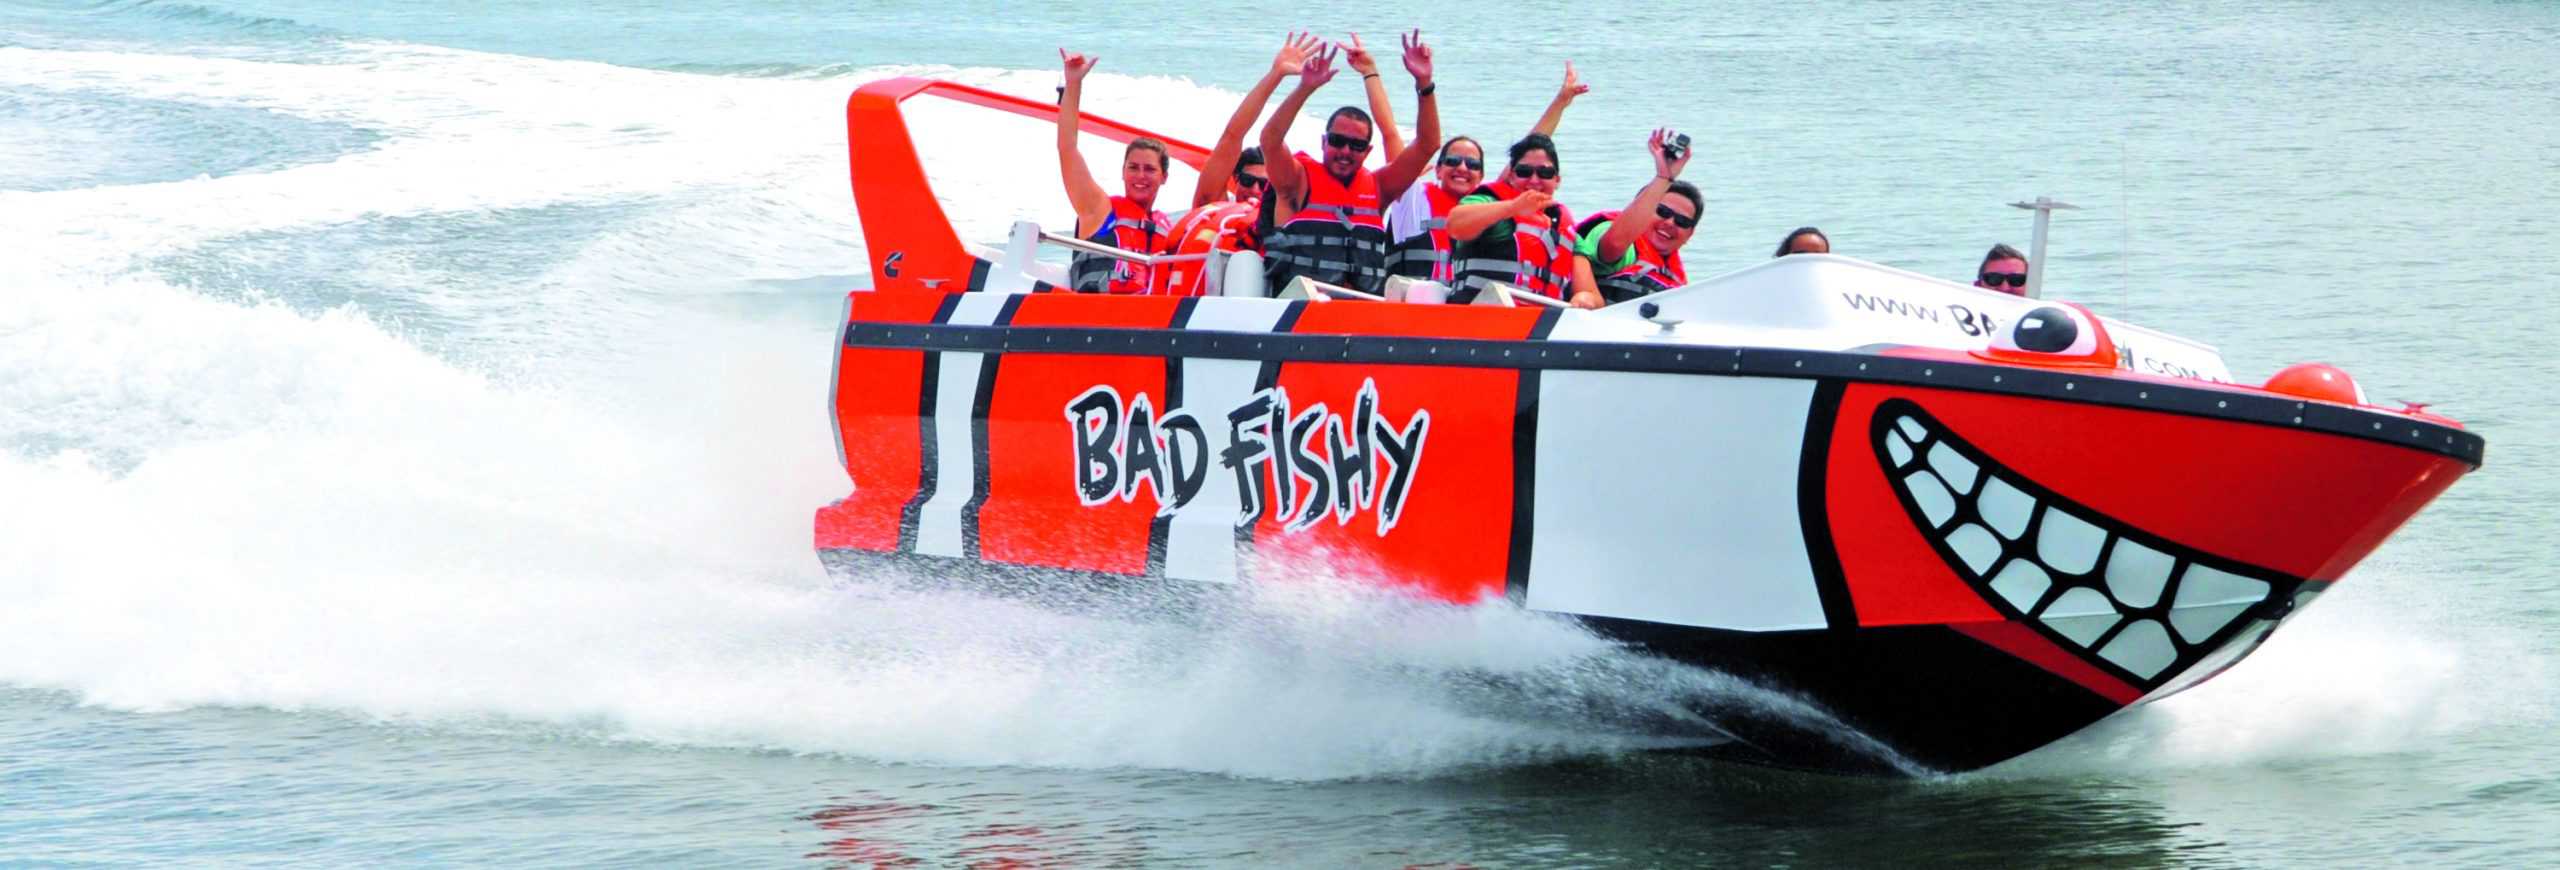 Jet Boat Through Cairns with Bad Fishy